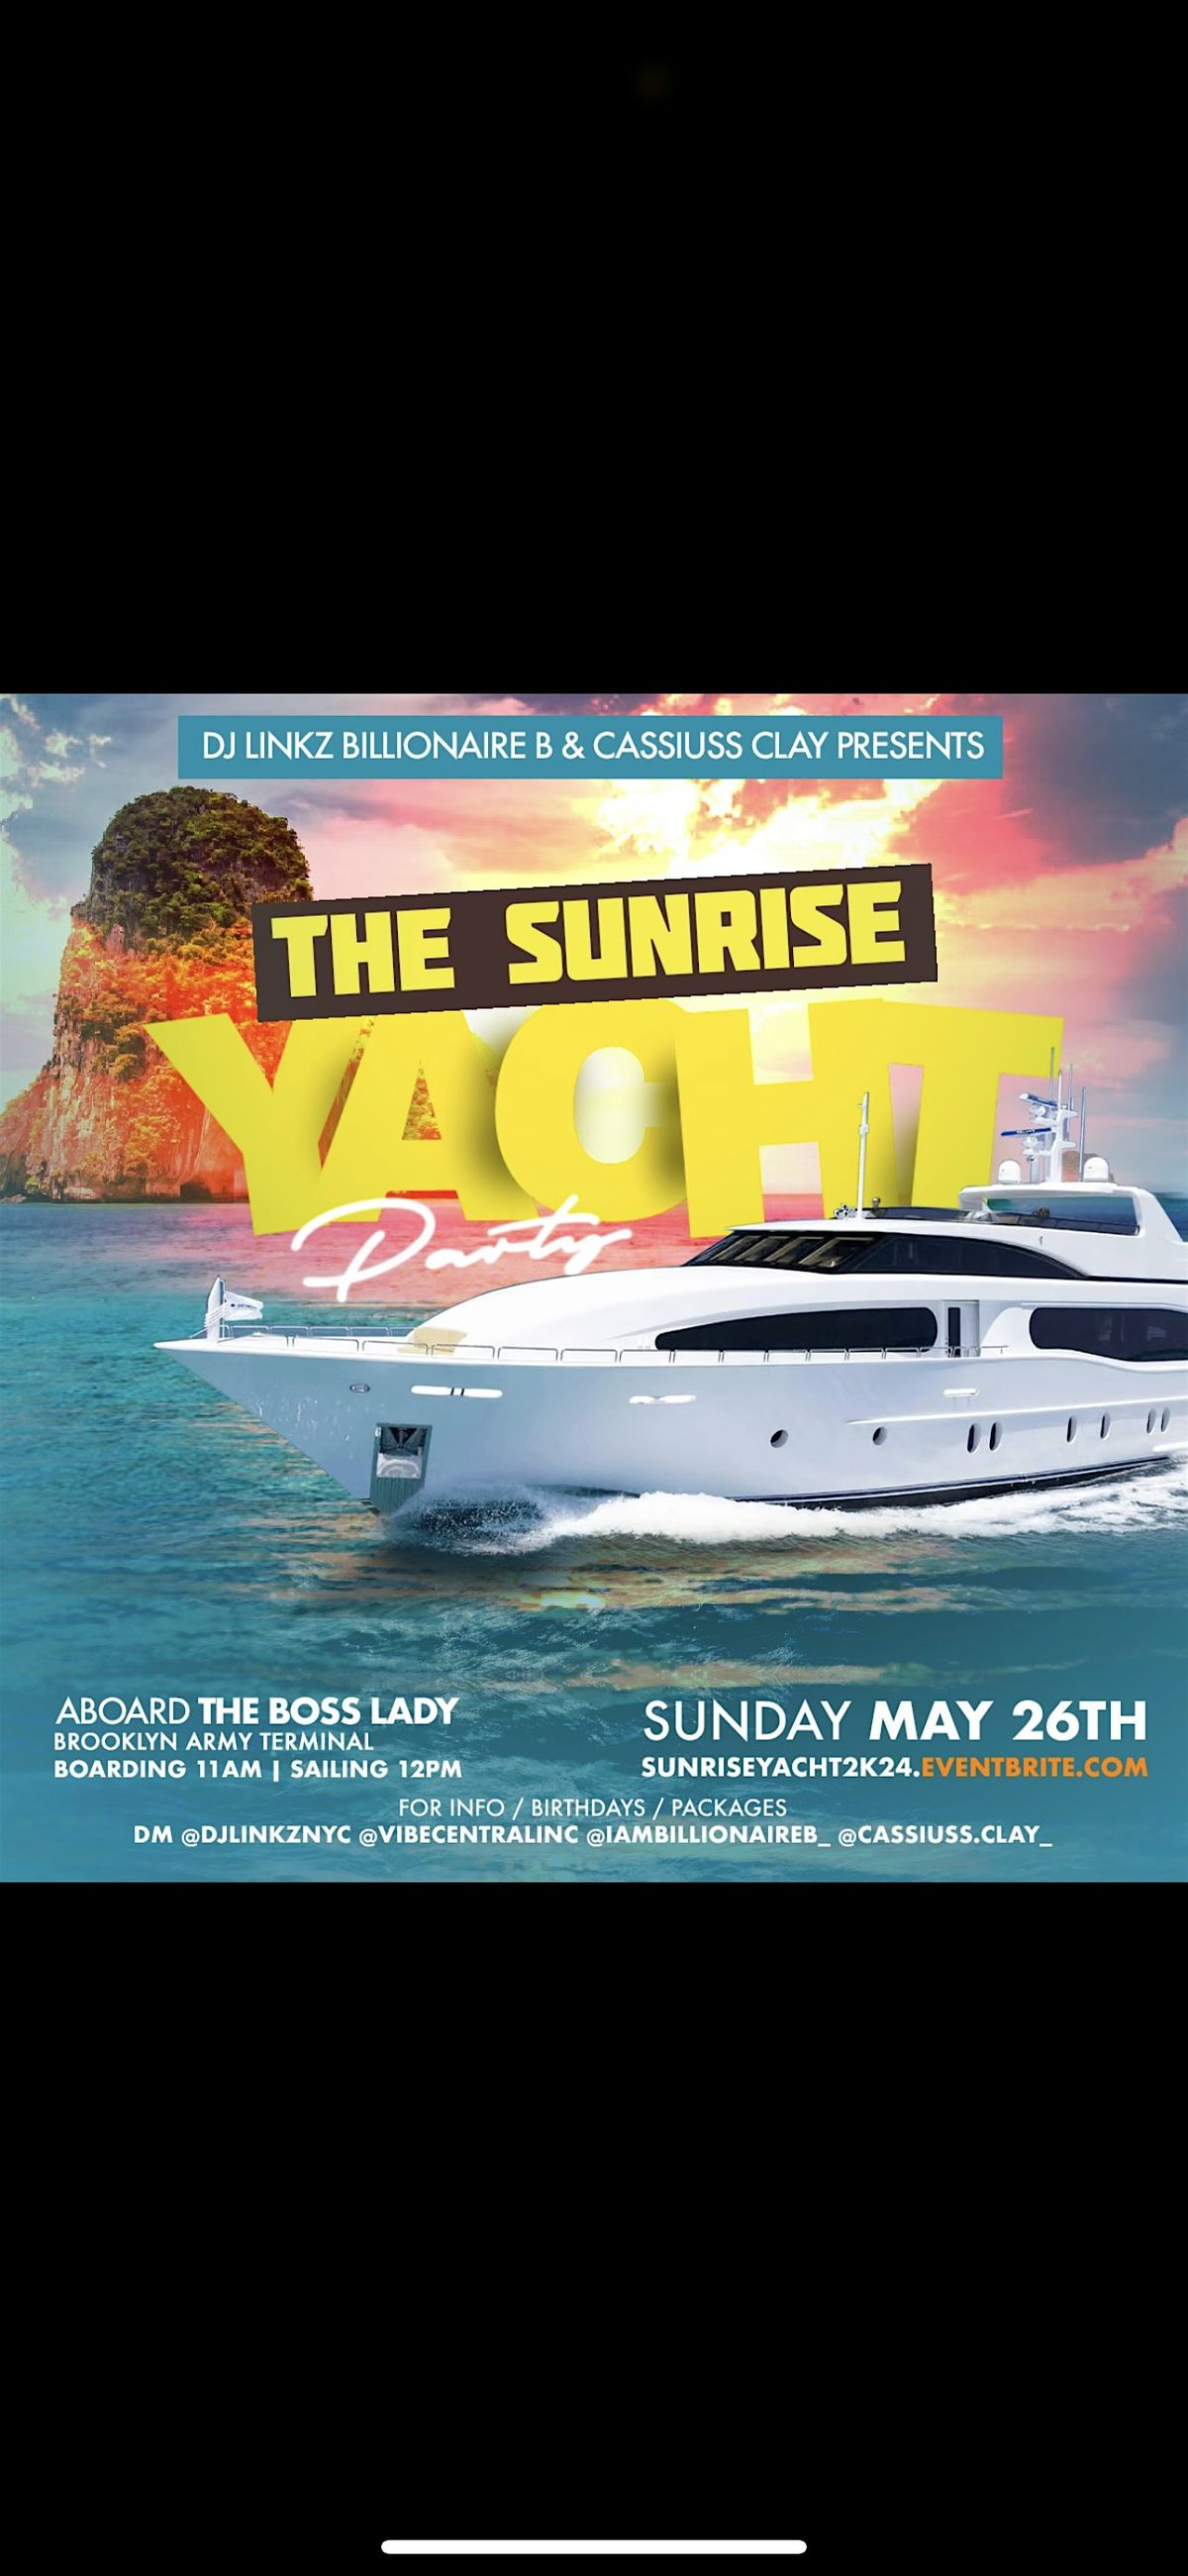 THE SUNRISE YACHT PARTY